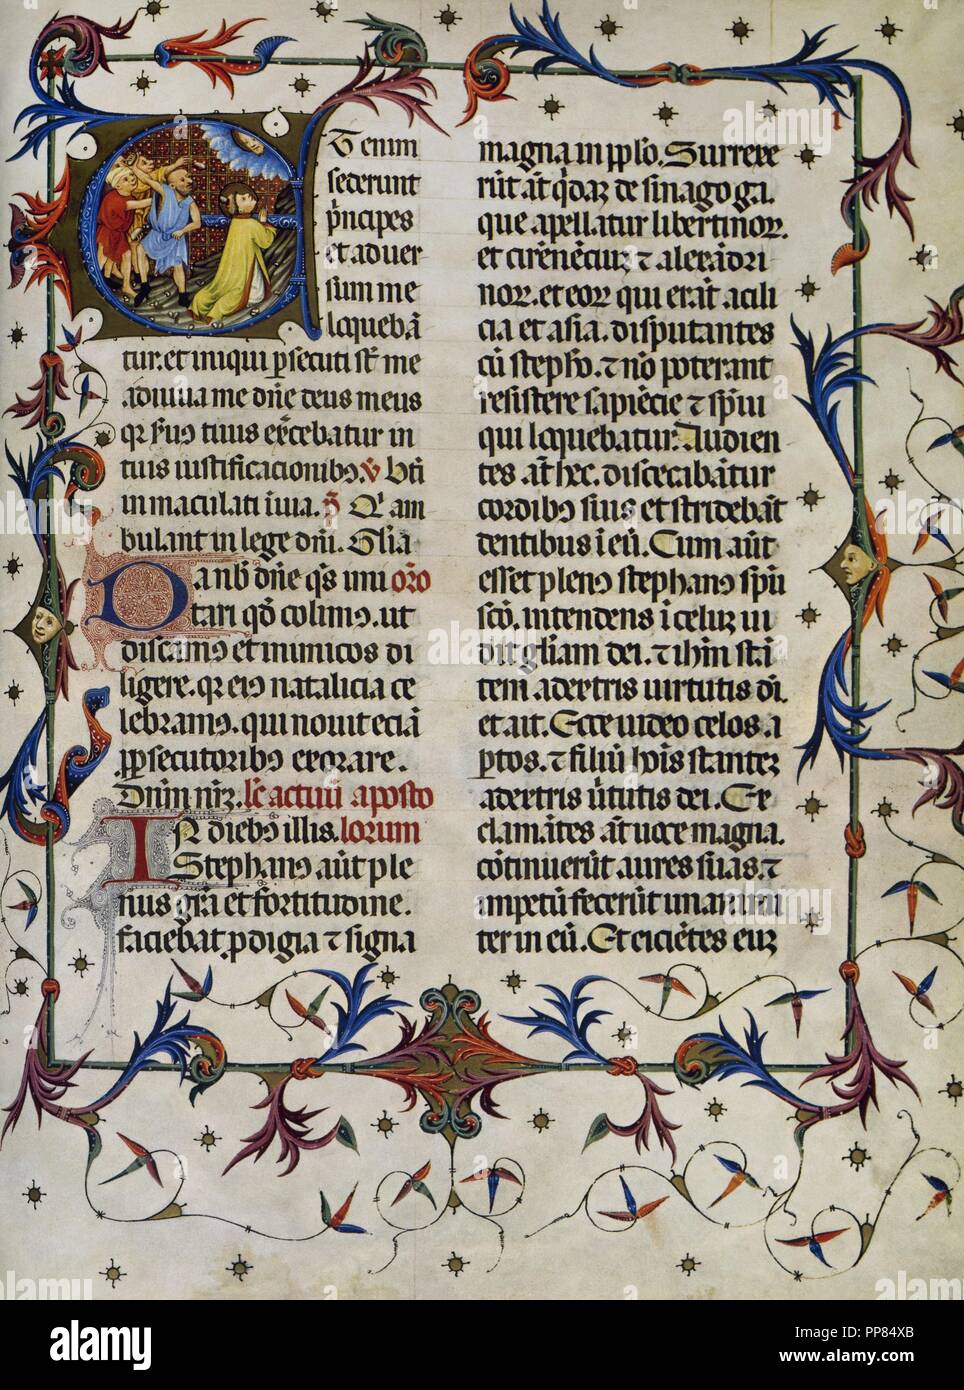 Missal. of St. Eulalia. Liturgical book, C. 1403. By Rafael Destorrents (1375-15th century). 1st folio. Martyrdom of St. Stephen, stoned to death. Archive of Barcelona Cathedral. Catalonia. Spain. Stock Photo